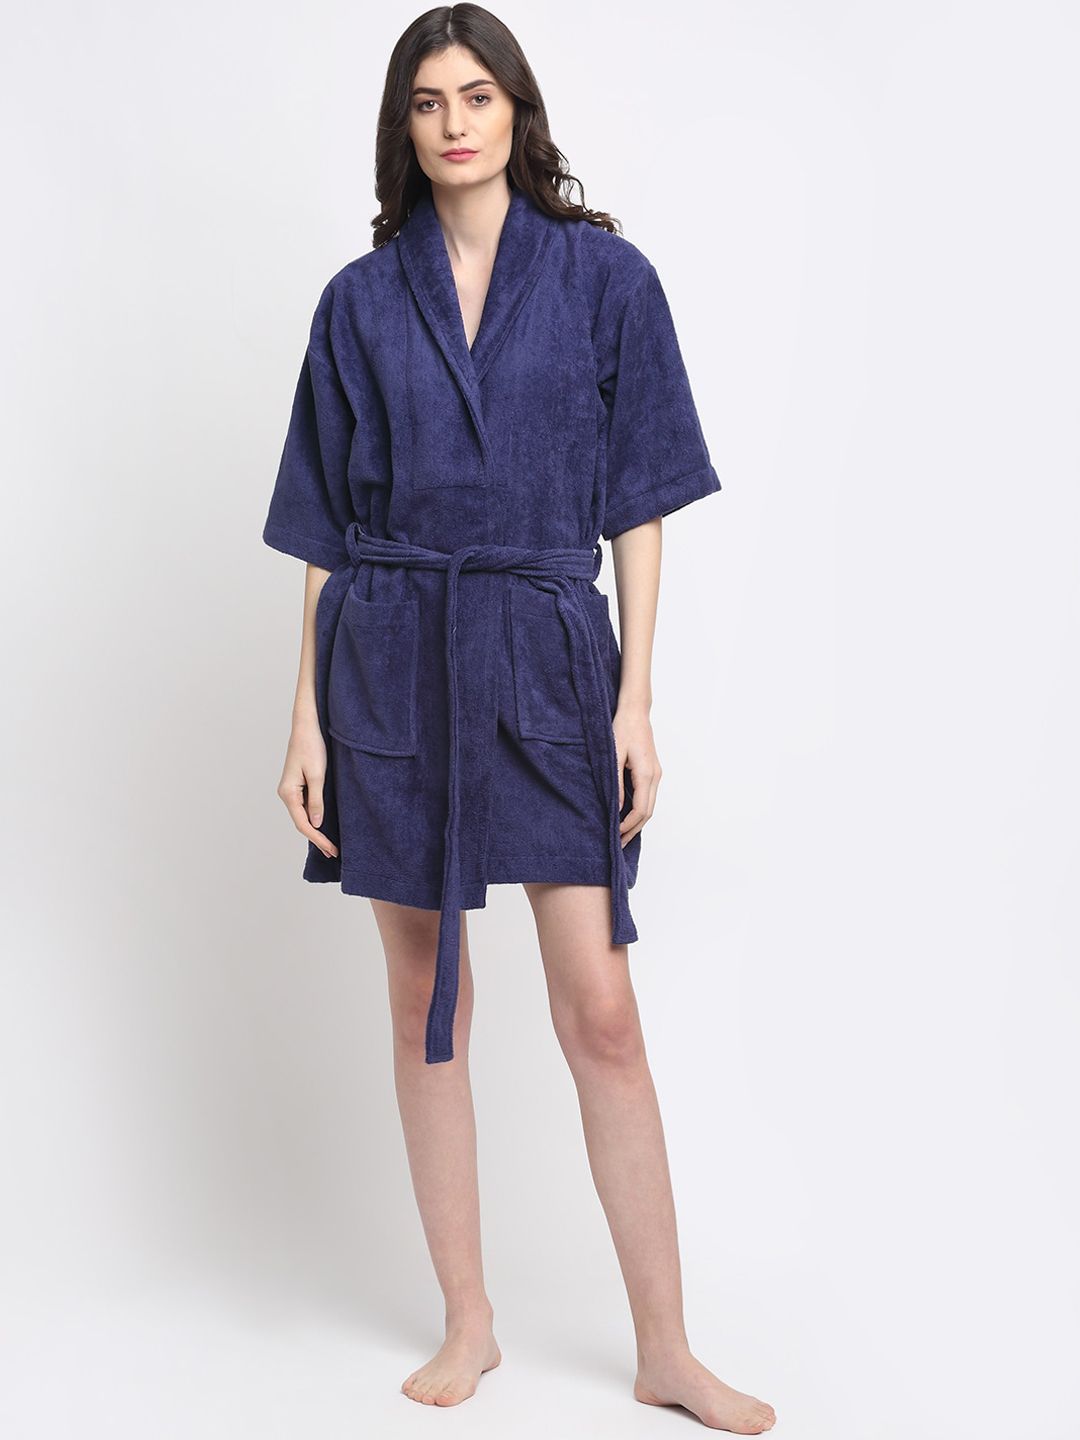 Creeva Navy Blue Solid 380 GSM Bath Robe Price in India